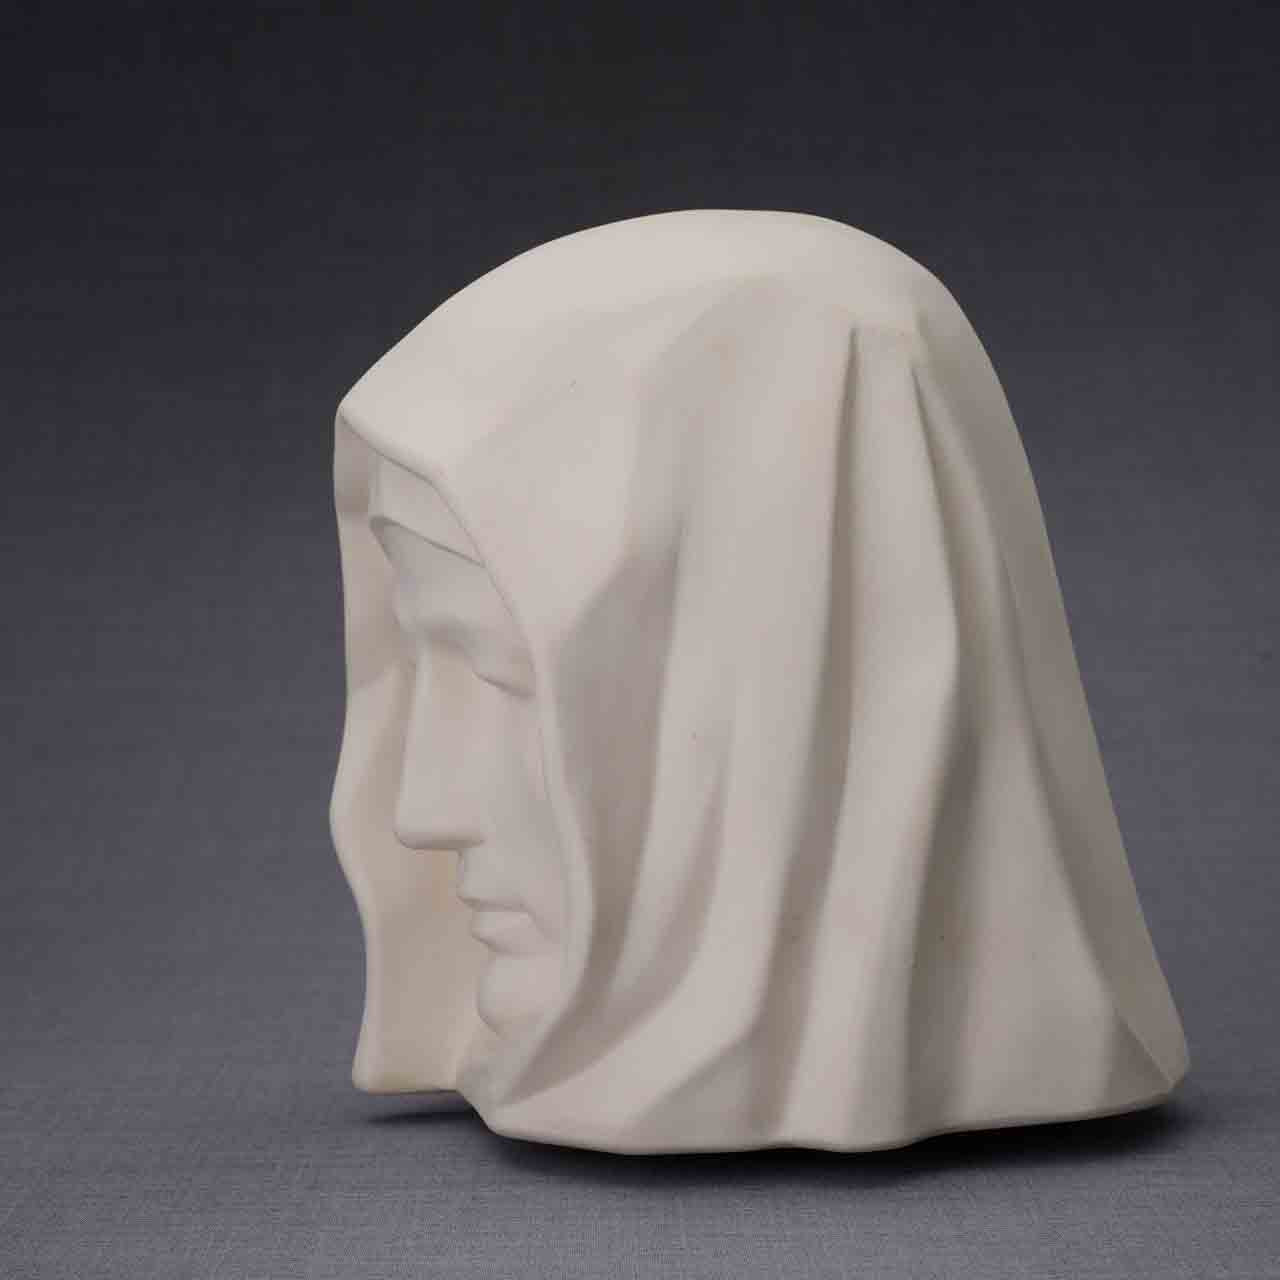 The Holy Mother Cremation Urn for Ashes in Matte White Facing Left Dark Background